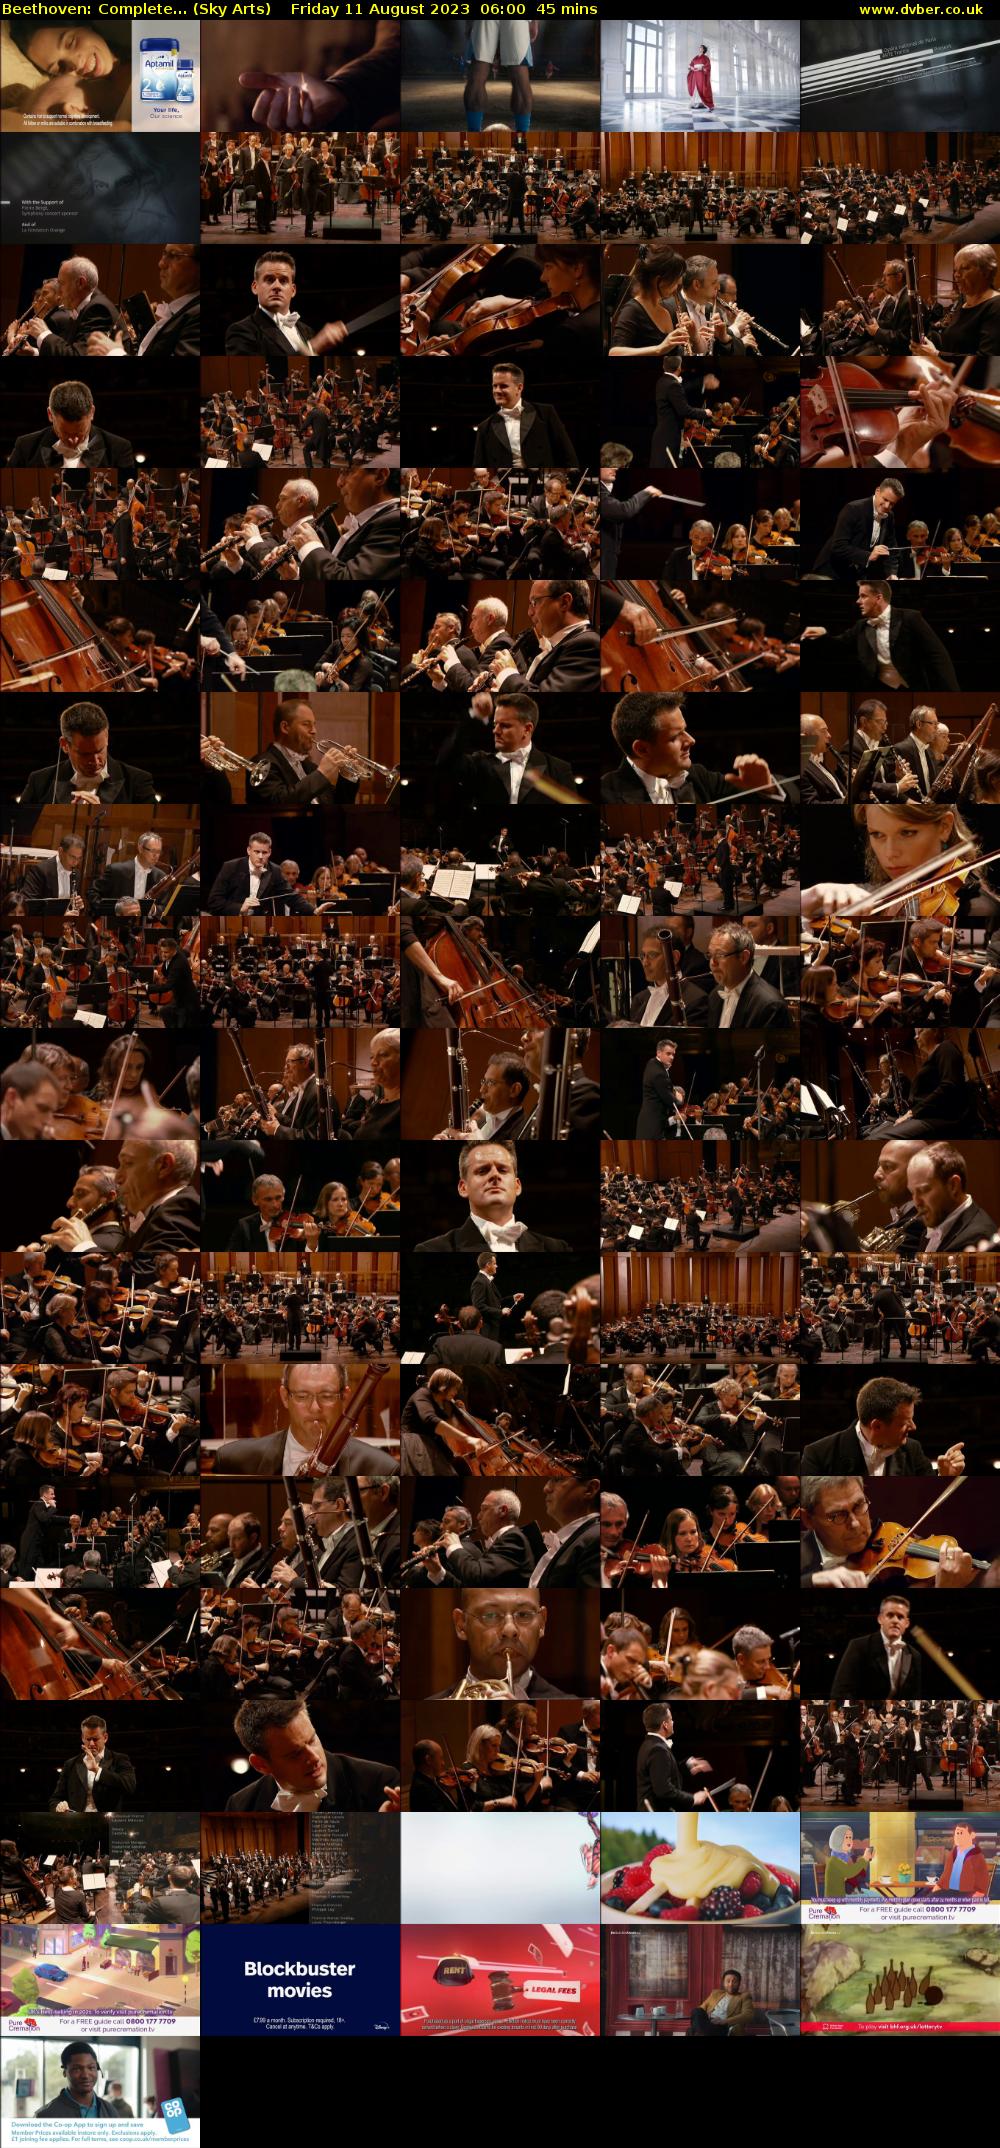 Beethoven: Complete... (Sky Arts) Friday 11 August 2023 06:00 - 06:45